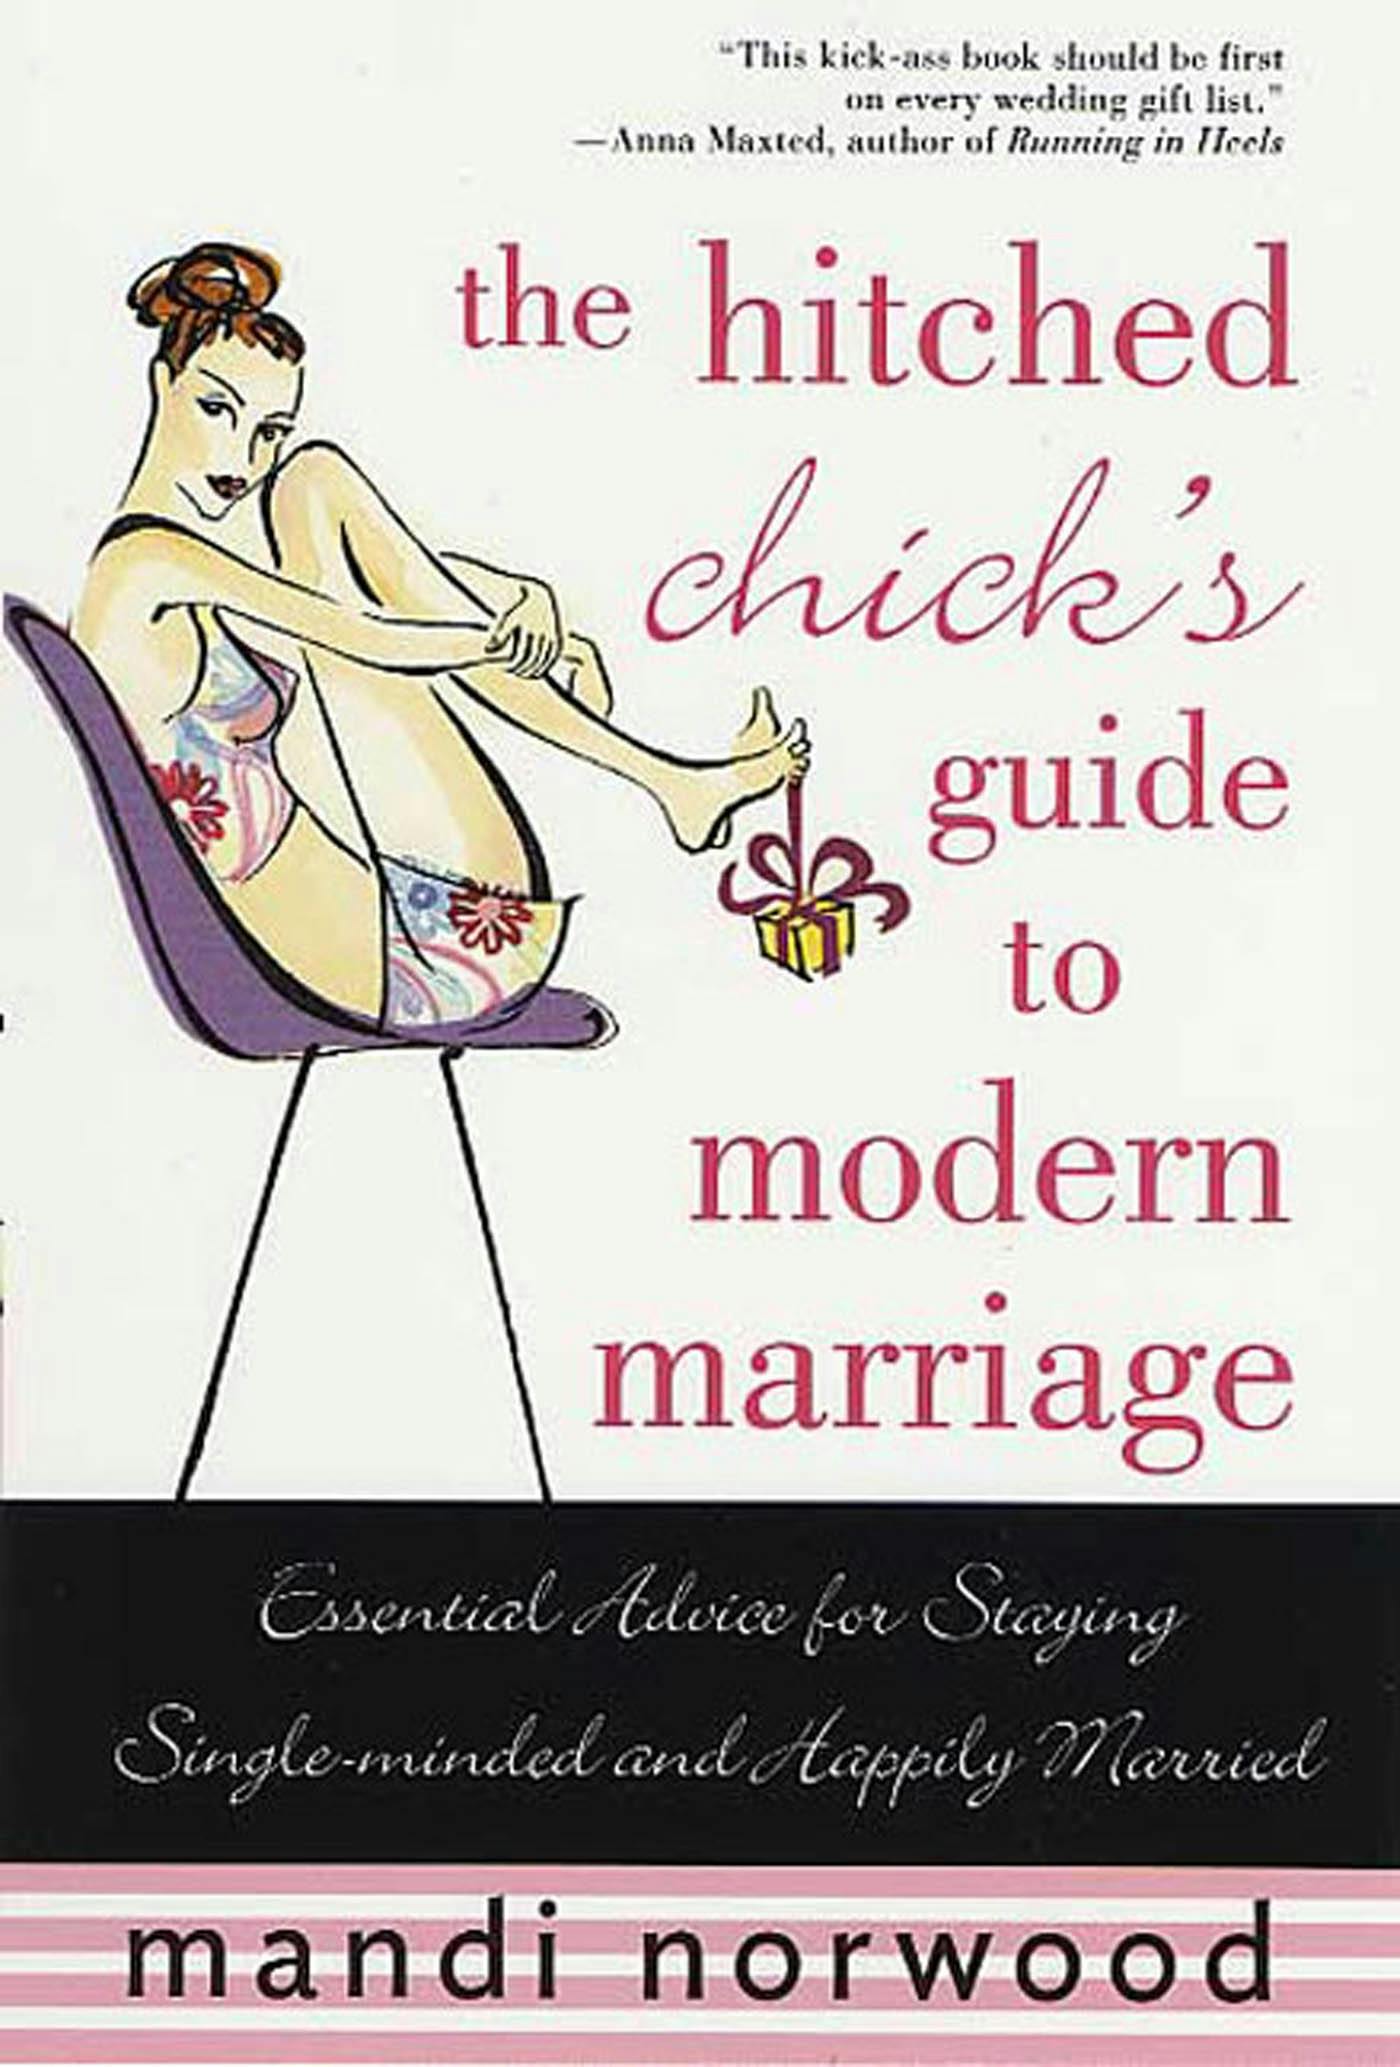 The Hitched Chicks Guide to Modern Marriage image